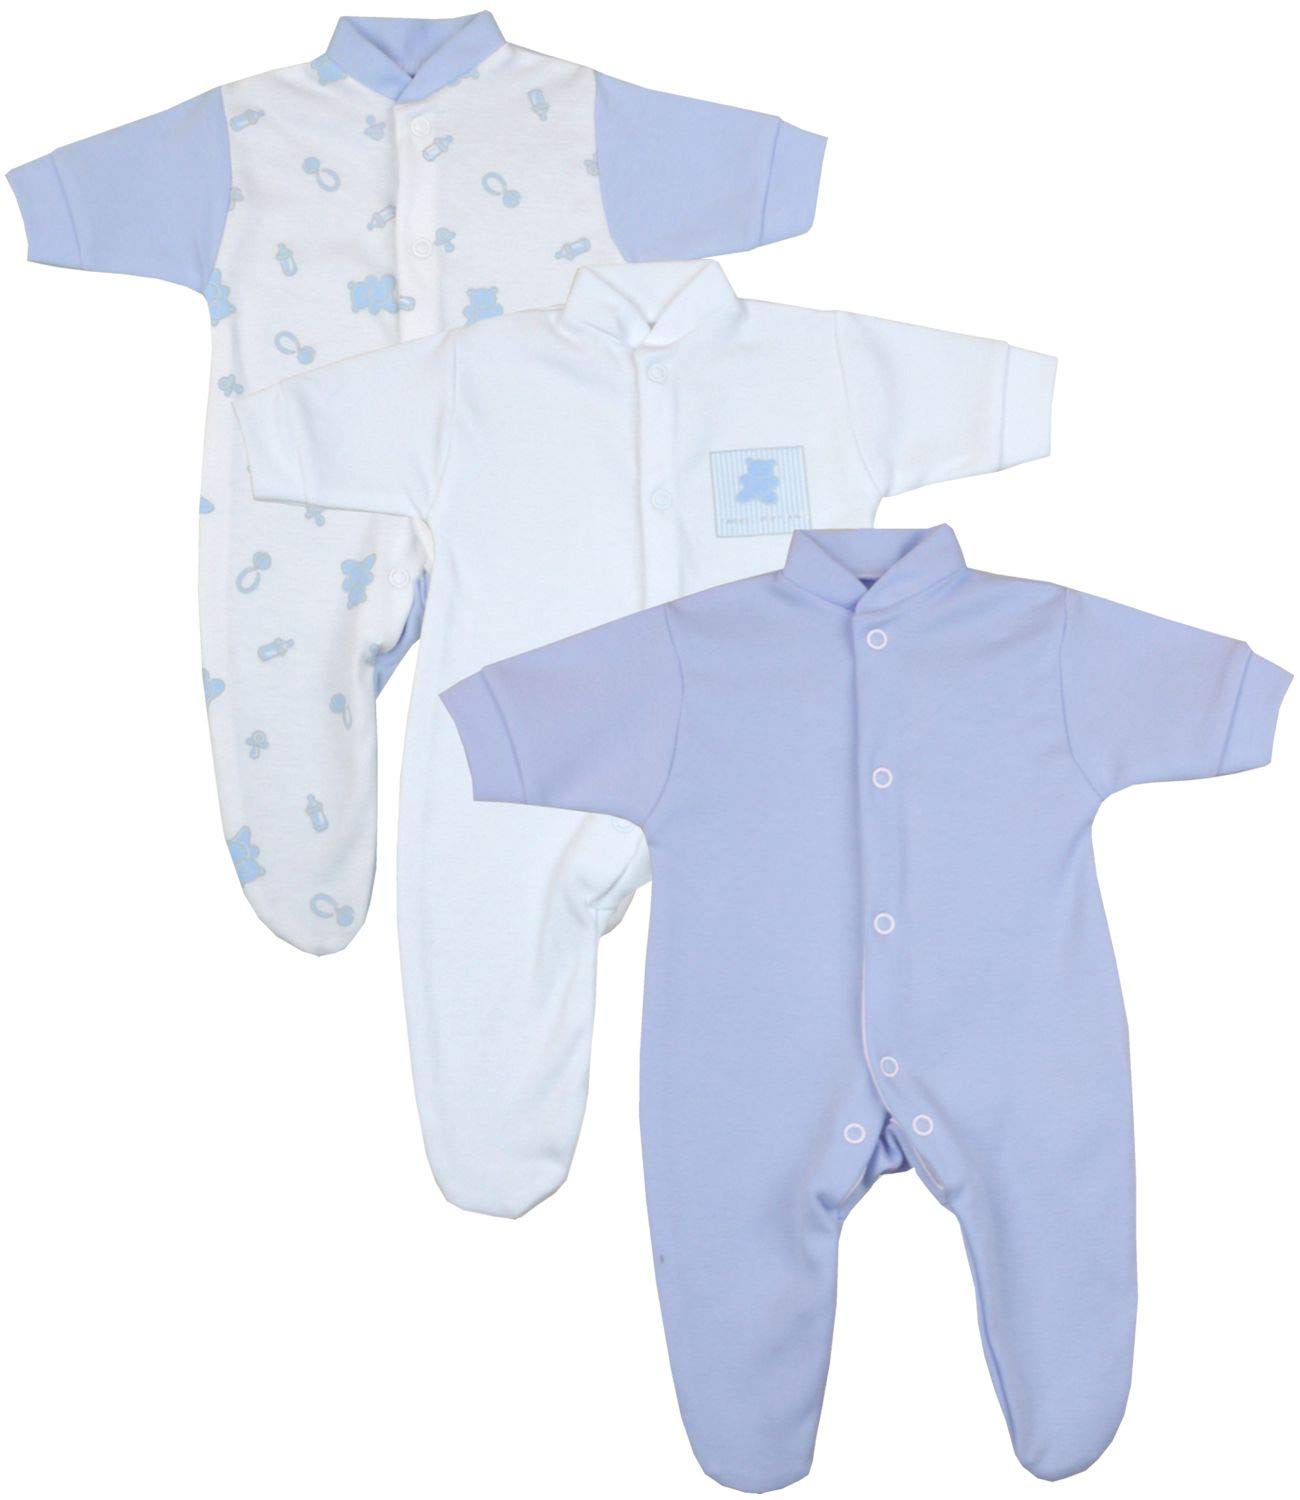 Babyprem Premature Early Baby Clothes Pack of 3 Sleepsuits/Babygros 4 Sizes to fit 0-7.5lb (32-38 size)